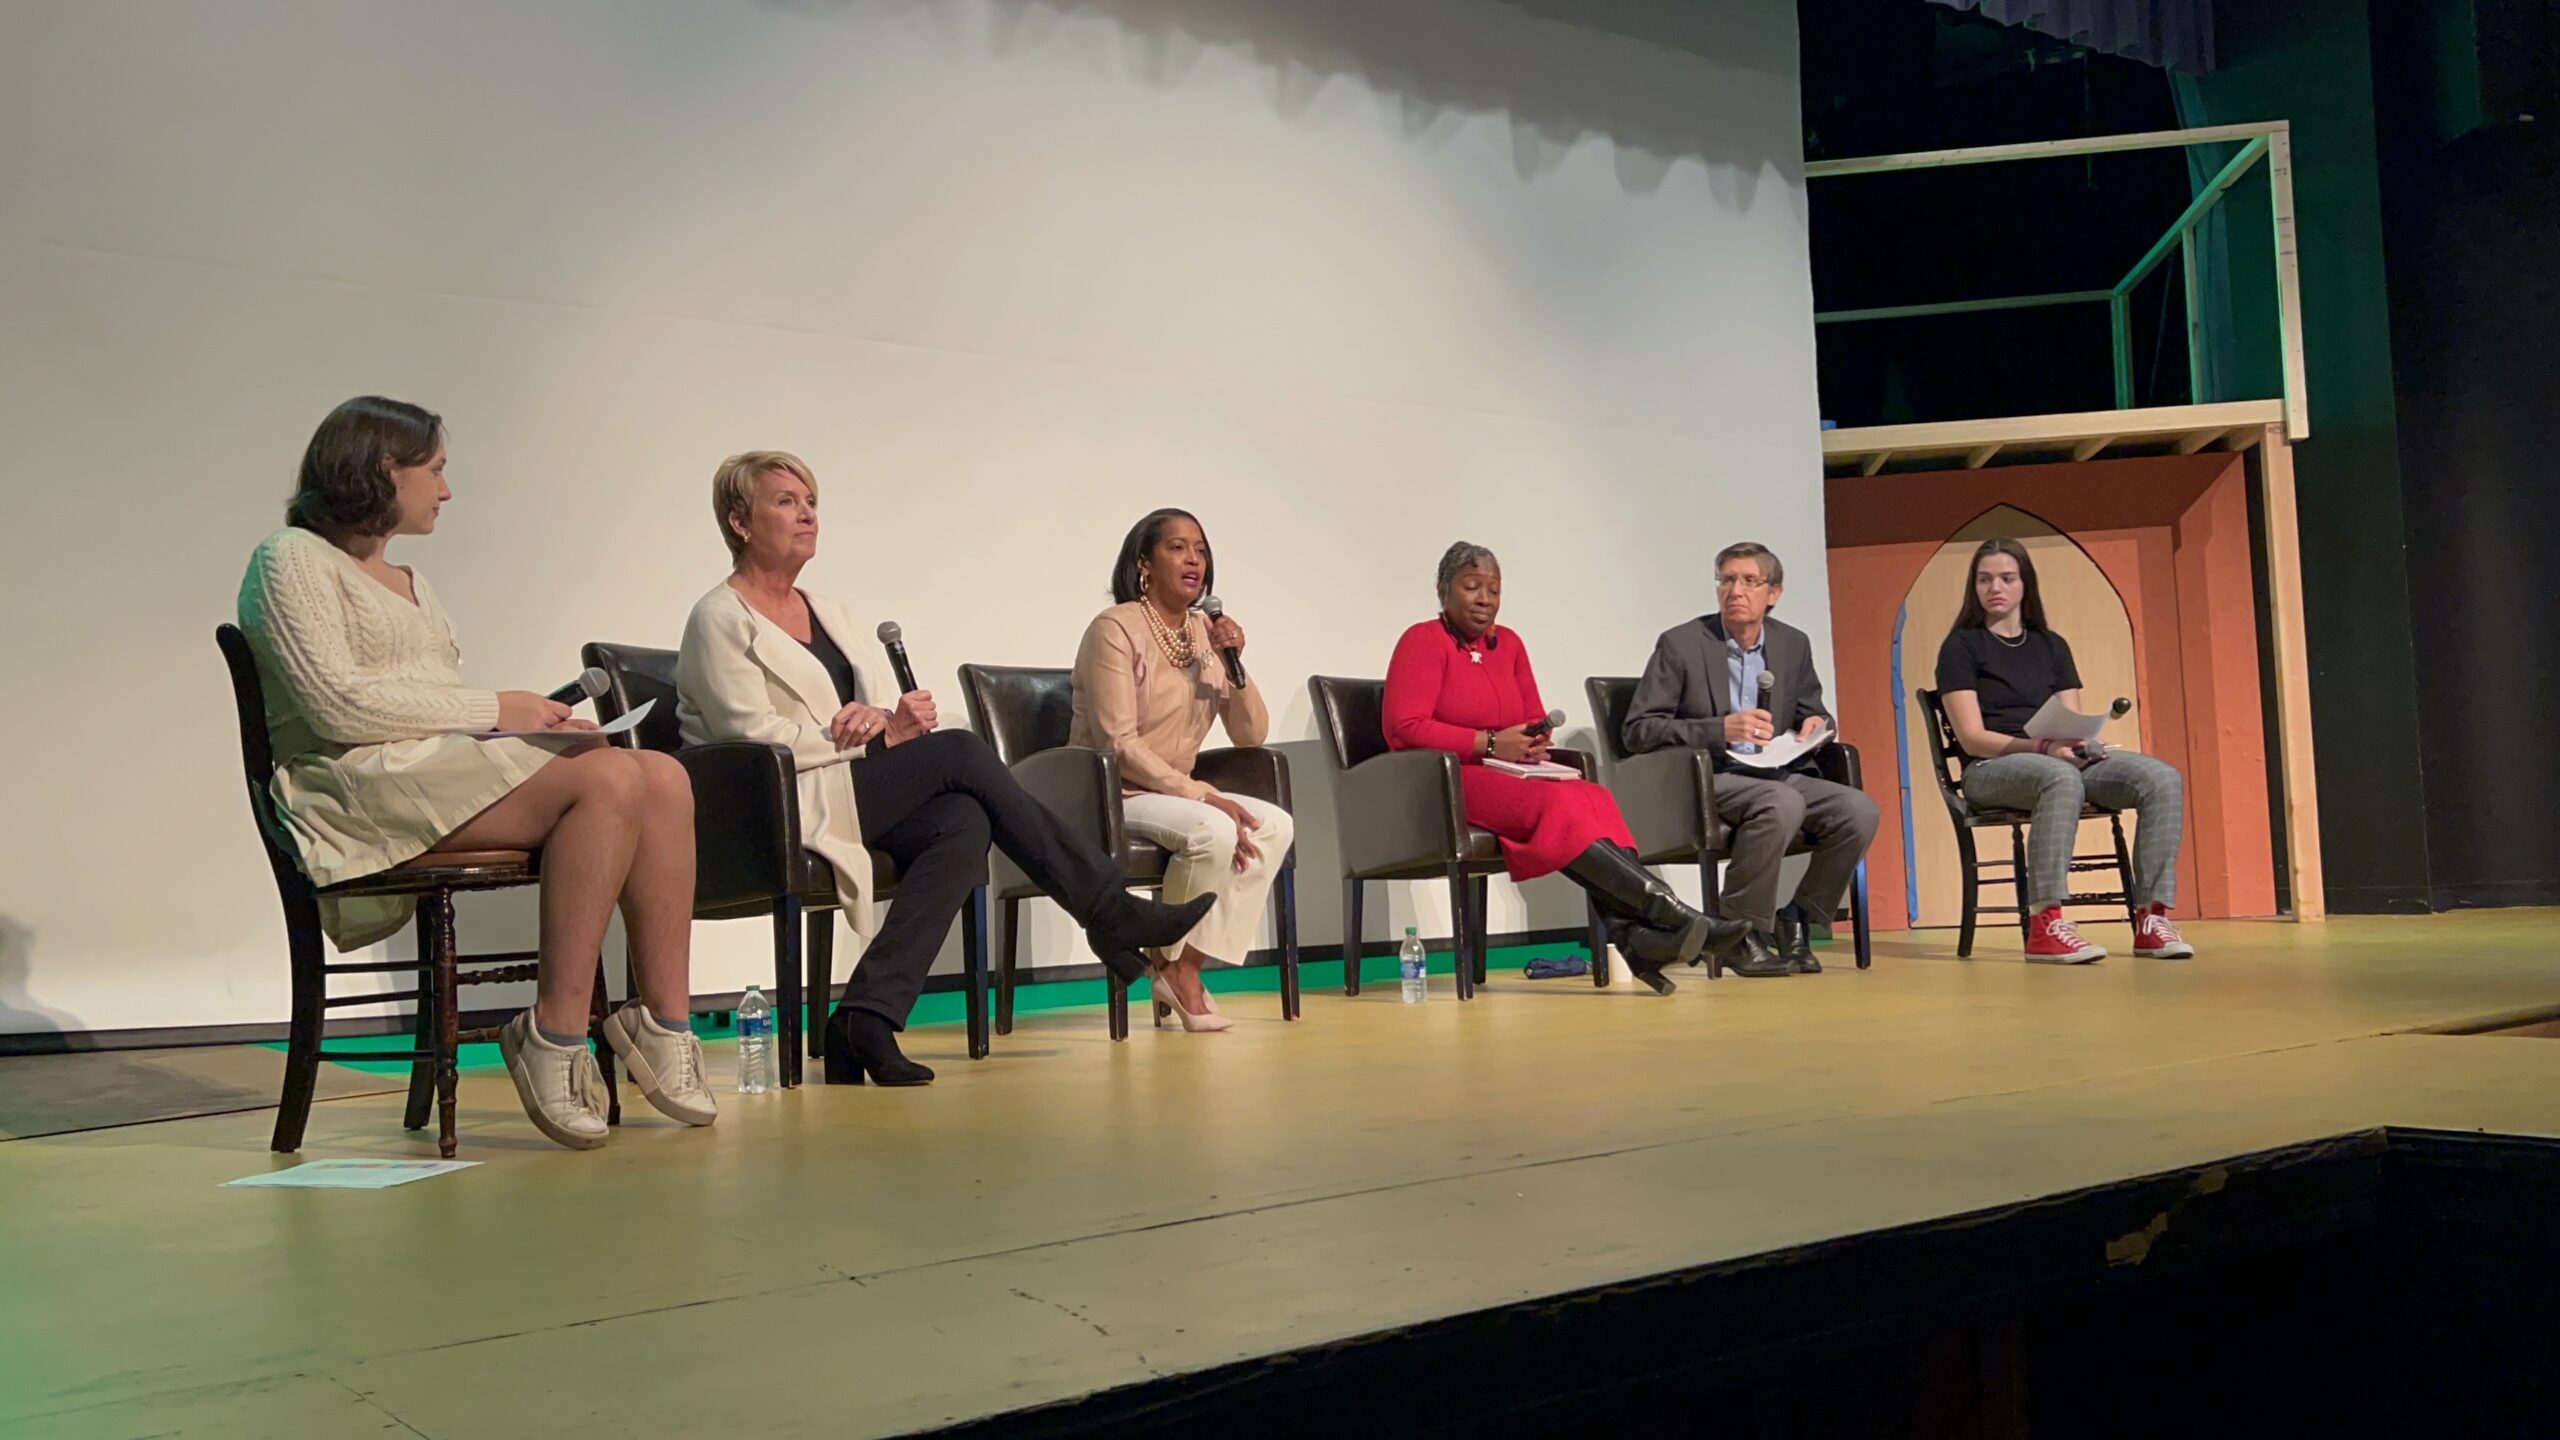 bipartisan panel discussion at Miss Porter's School